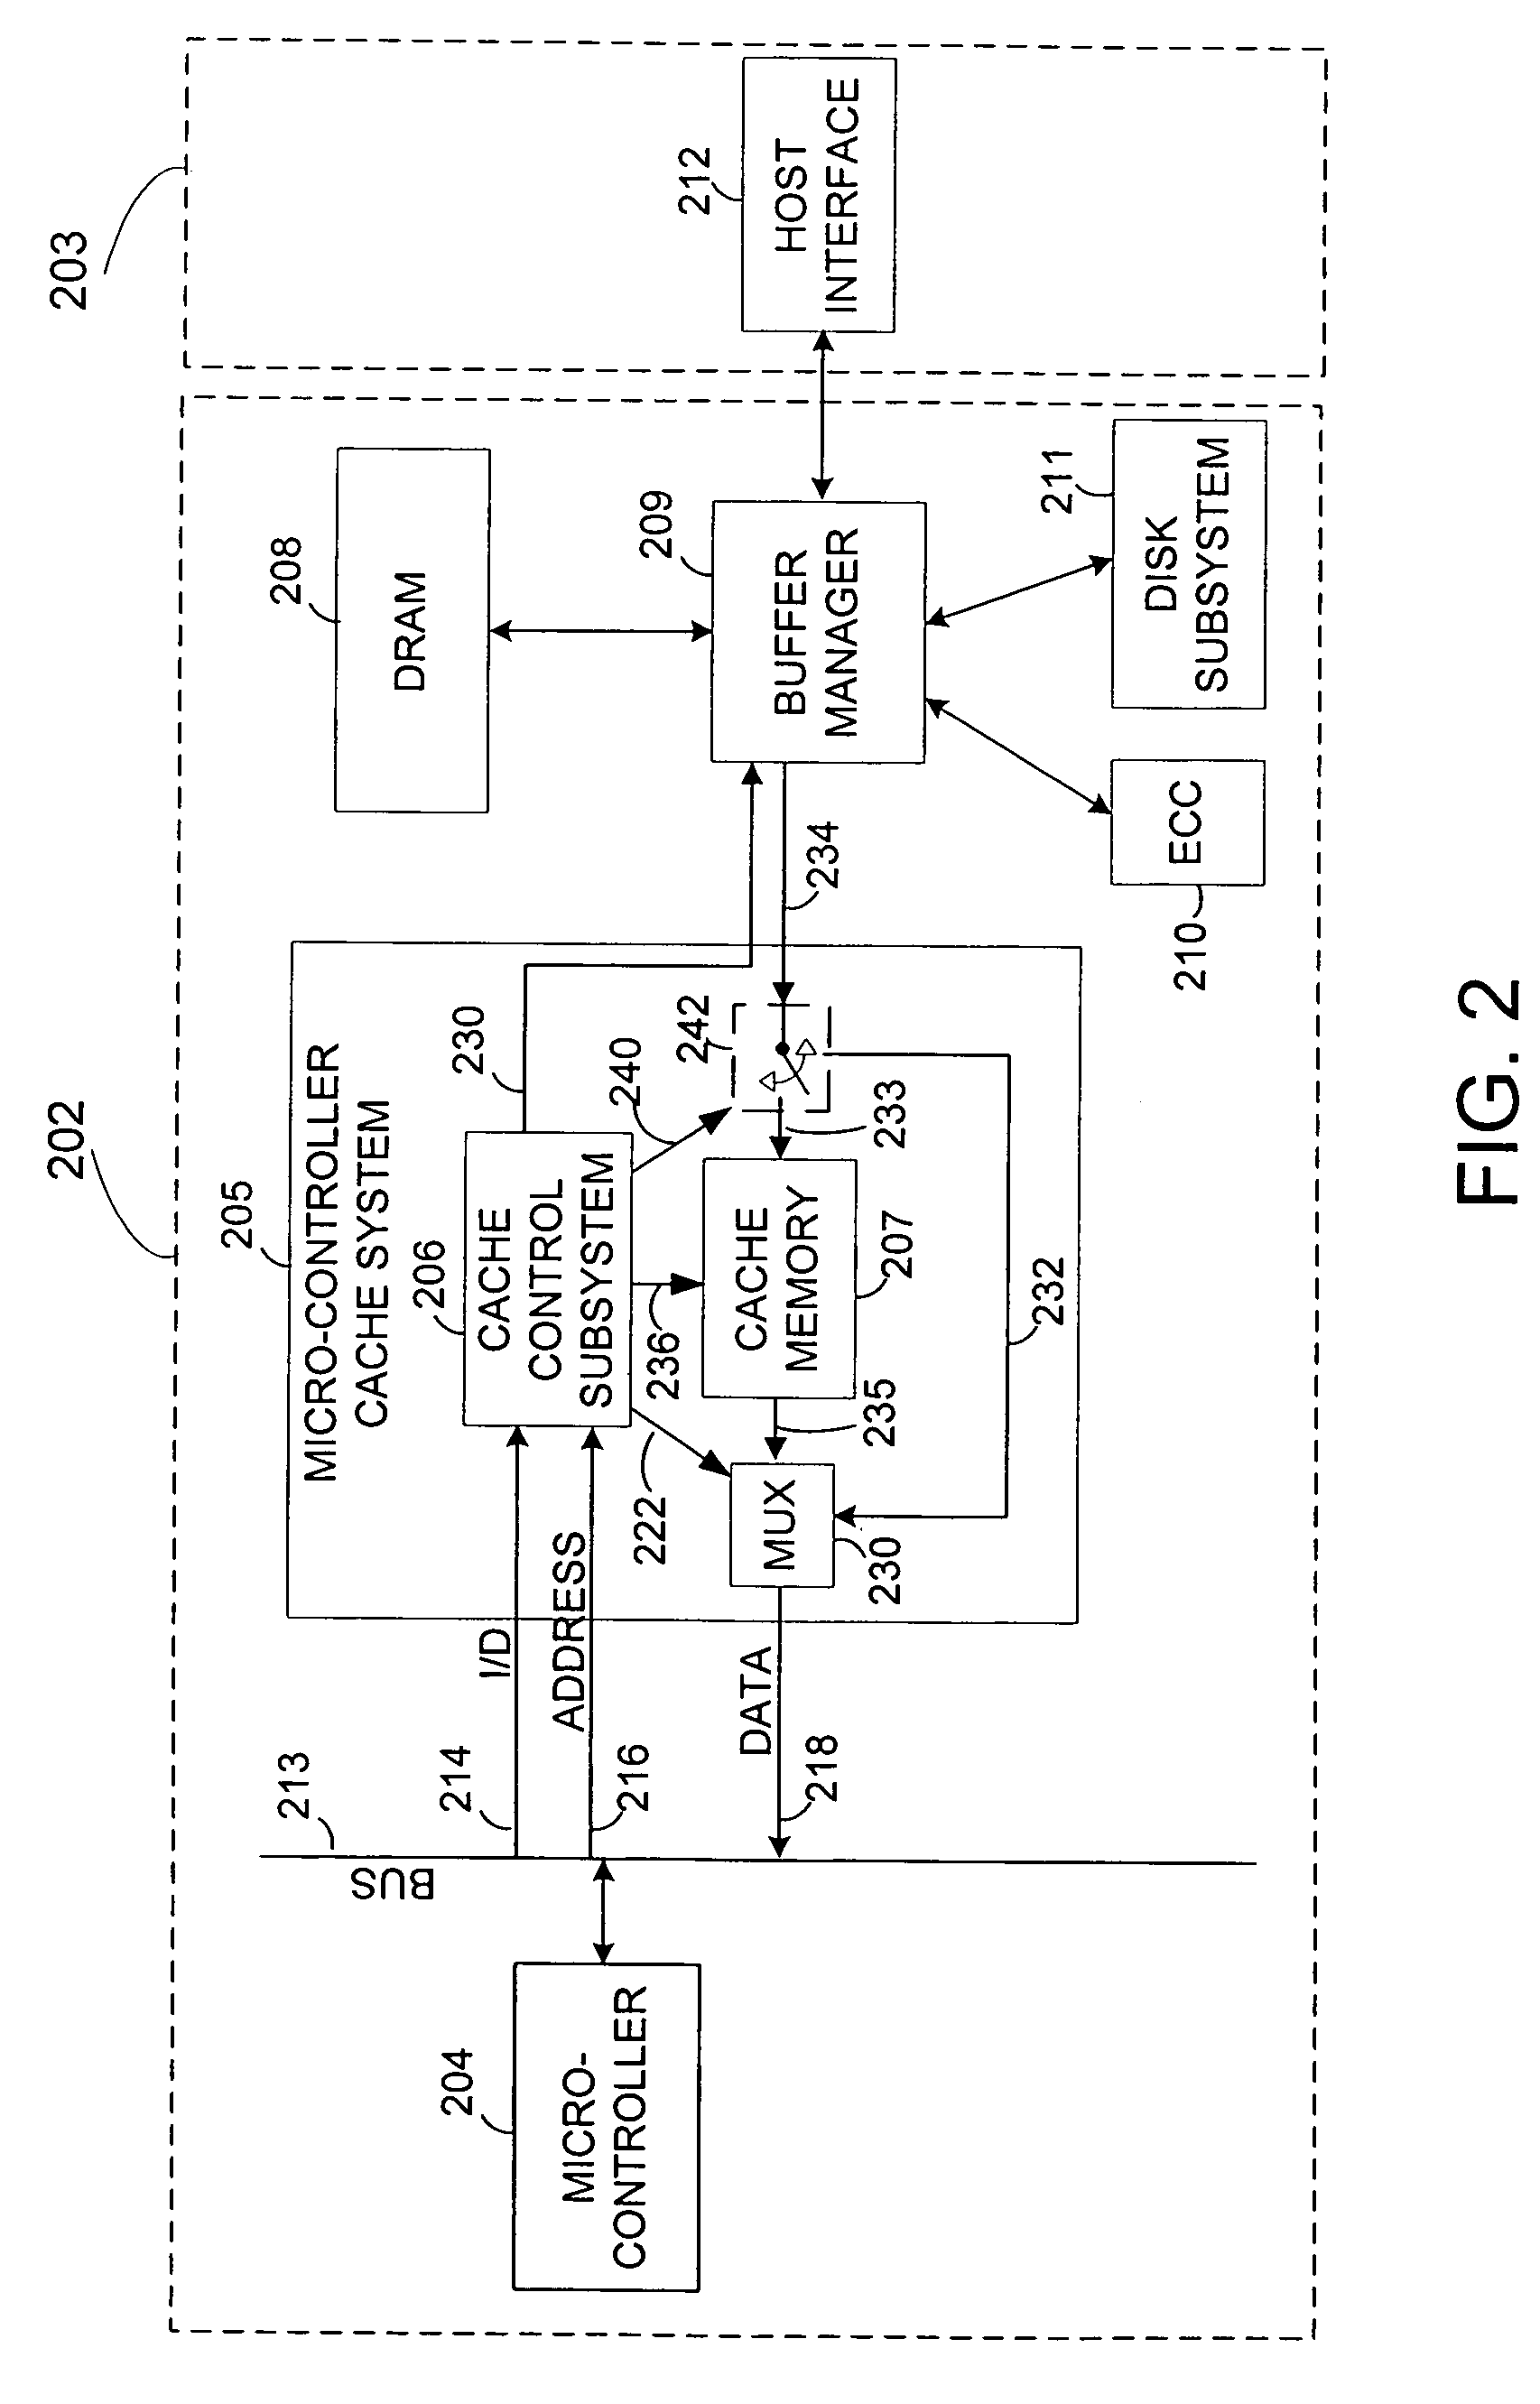 Fetch operations in a disk drive control system